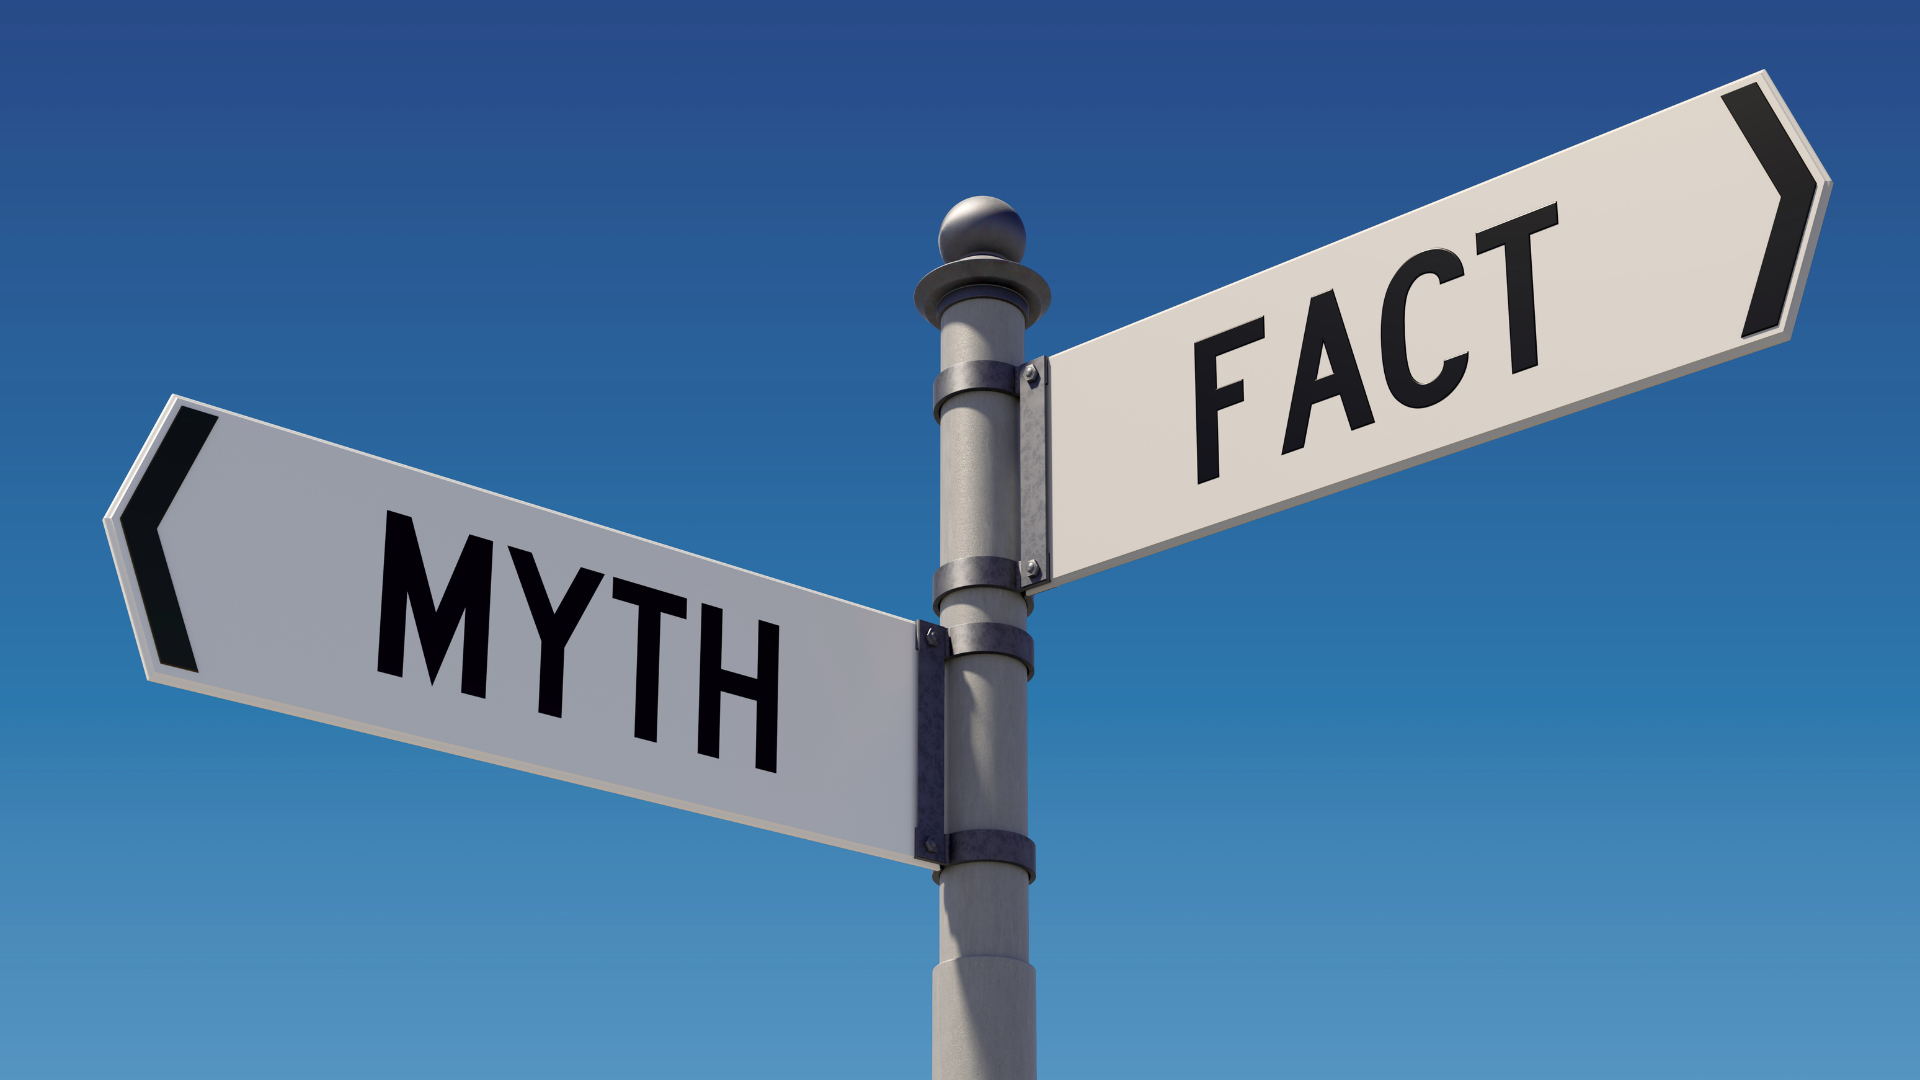 Haircut Myths and Facts